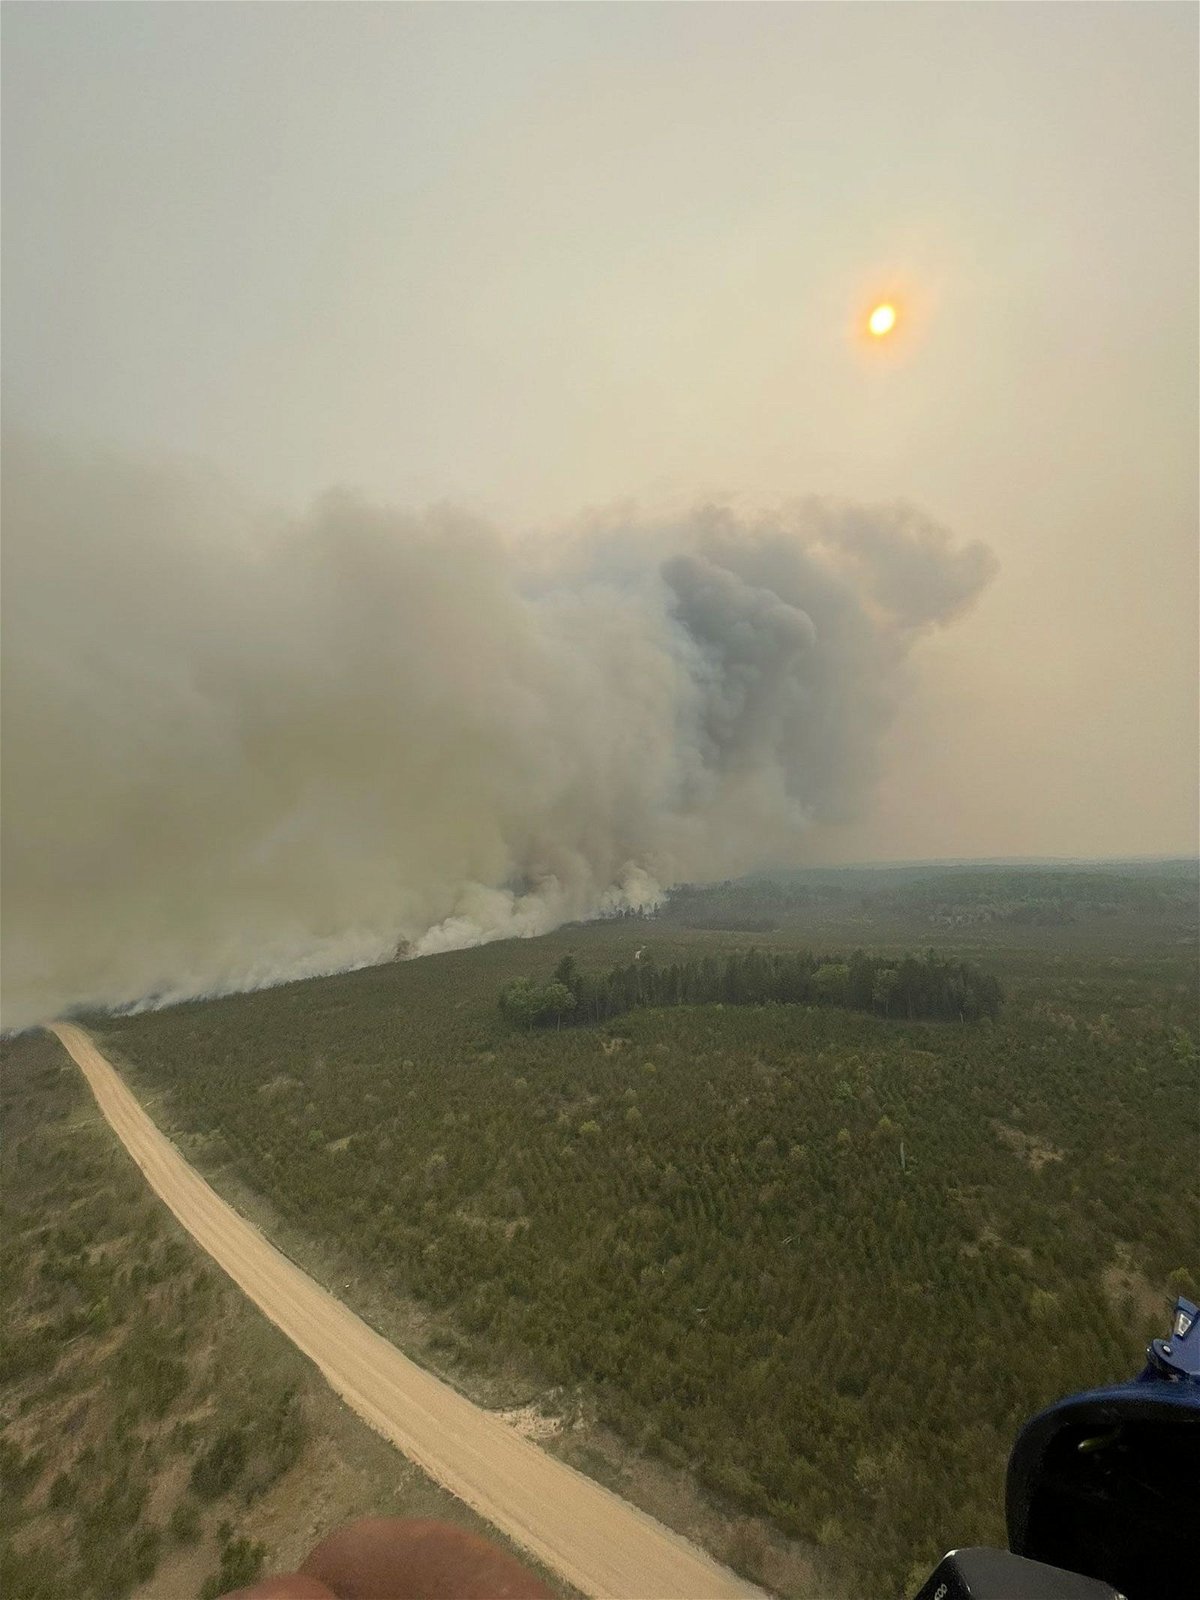 <i>From Michigan State Police Seventh District/Twitter</i><br/>A wildfire in Crawford County